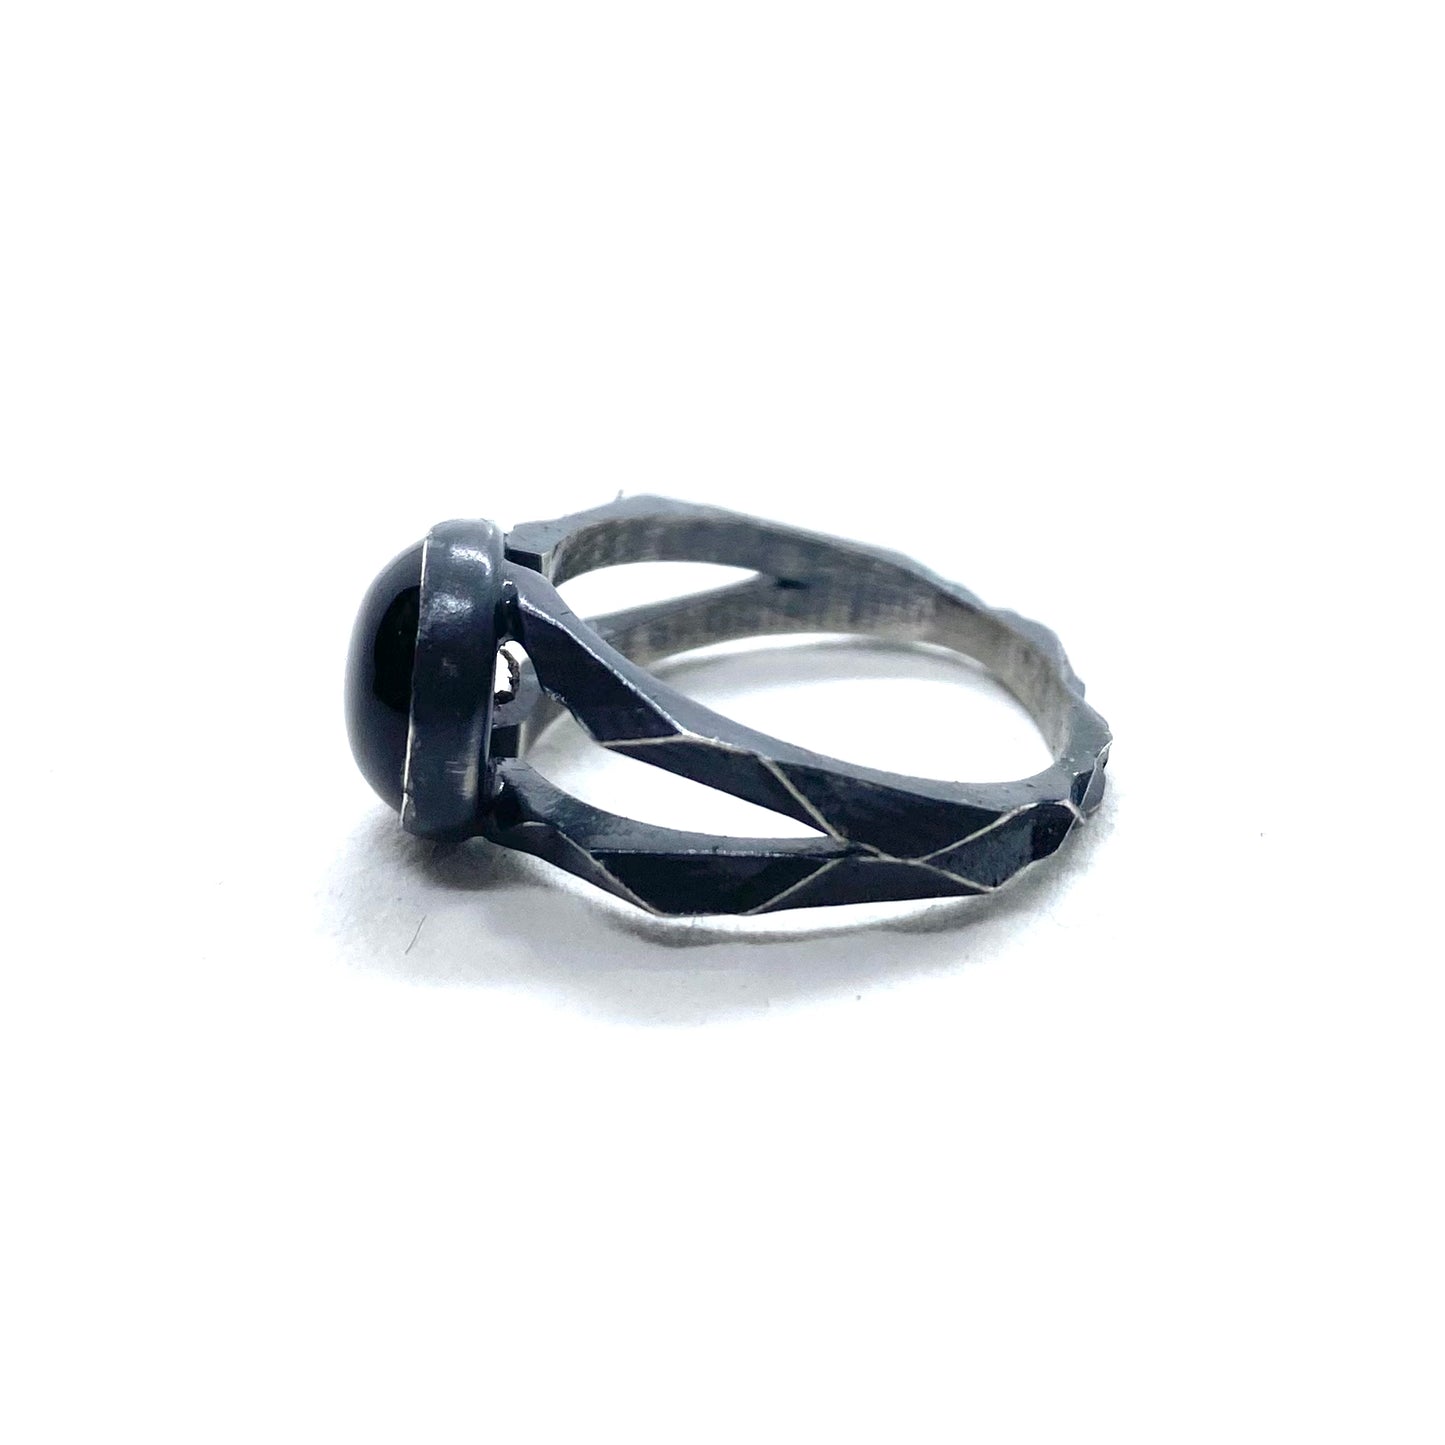 Brutalist Ring with Black Onyx in Sterling Silver